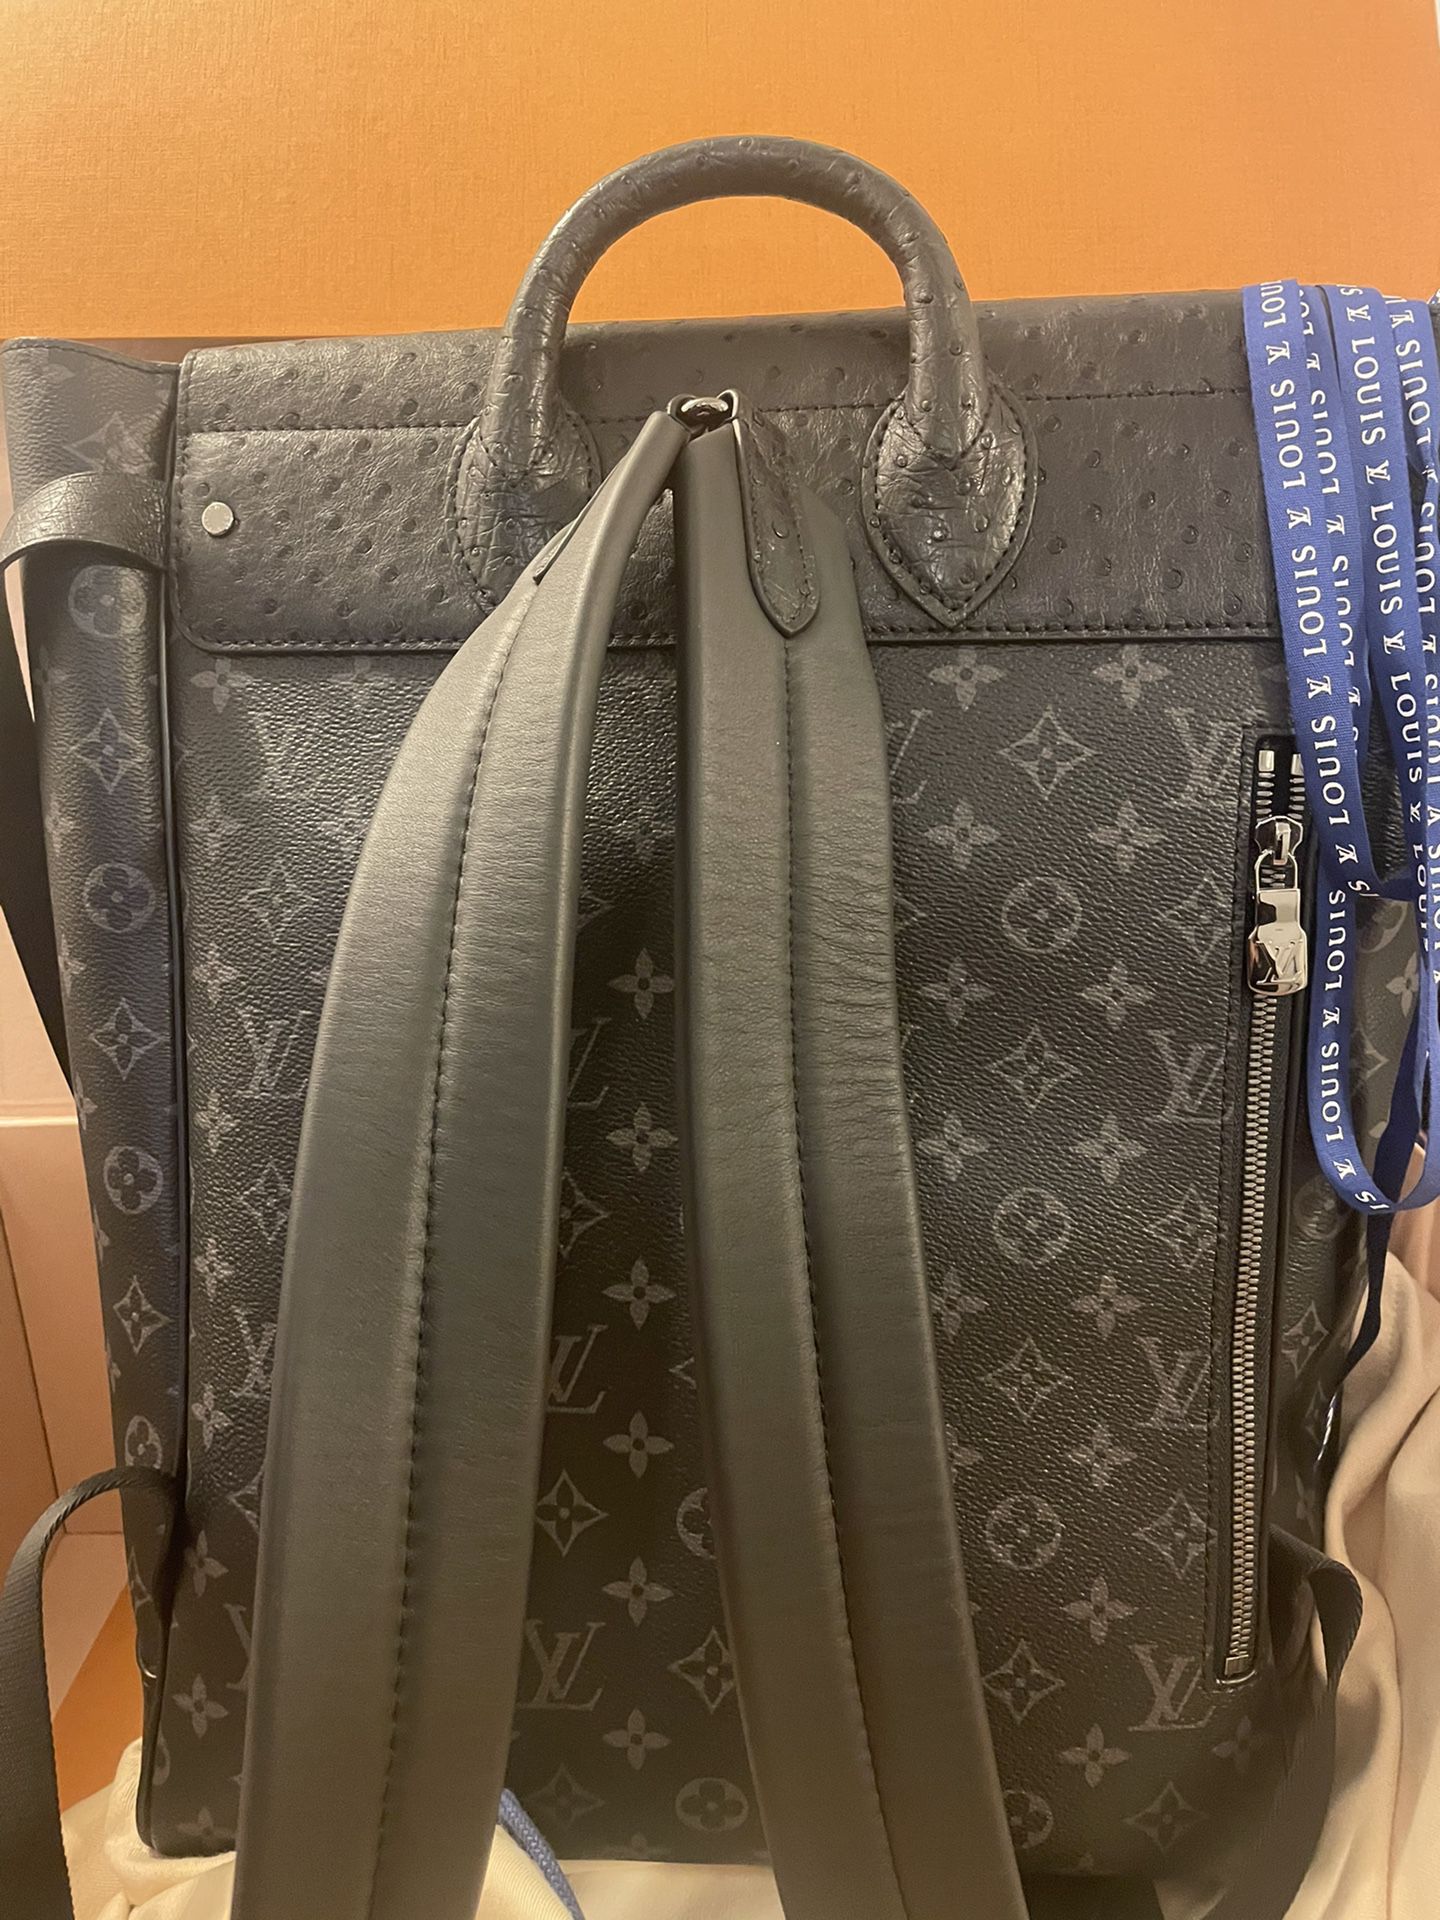 Authentic Louis Vuitton Men Backpack Sale in Angeles, CA - OfferUp